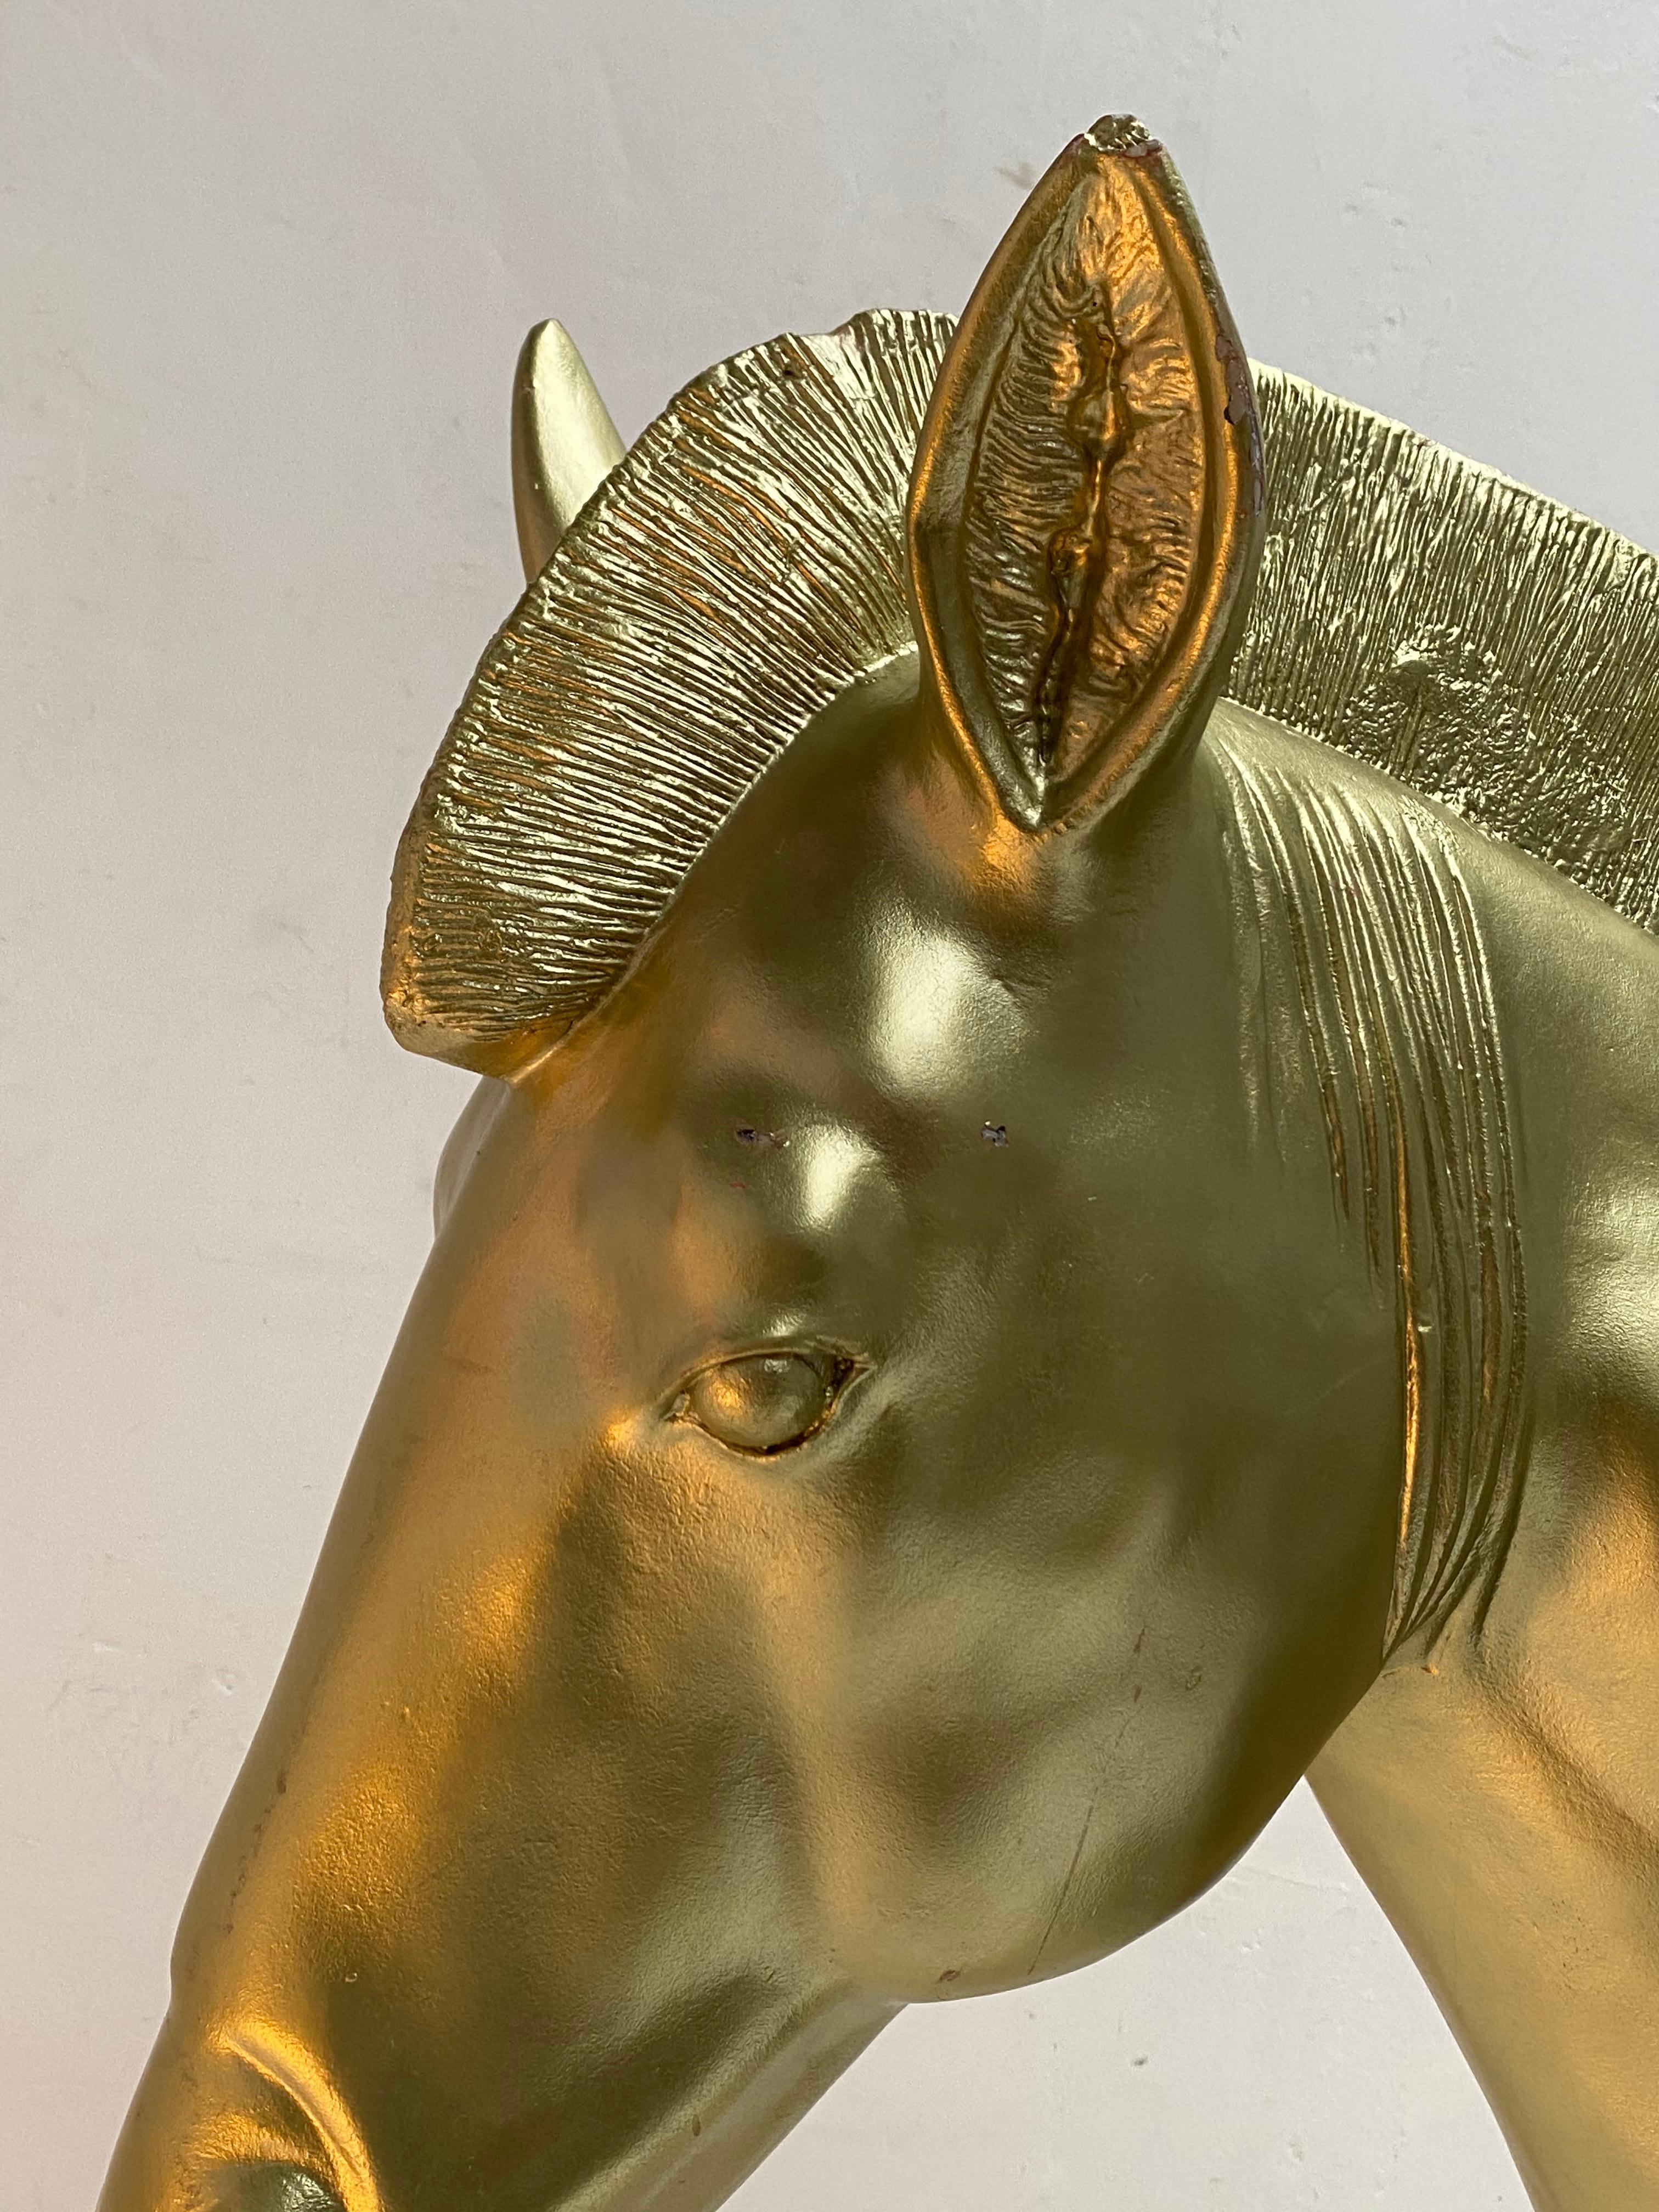 This real sized golden horse was created for the flagship lingerie store of Dutch designer Marlies Dekkers in the Hague, the Netherlands

Known for her daring design for women she creates wonderful exclusive lingerie outfits

The horse has a